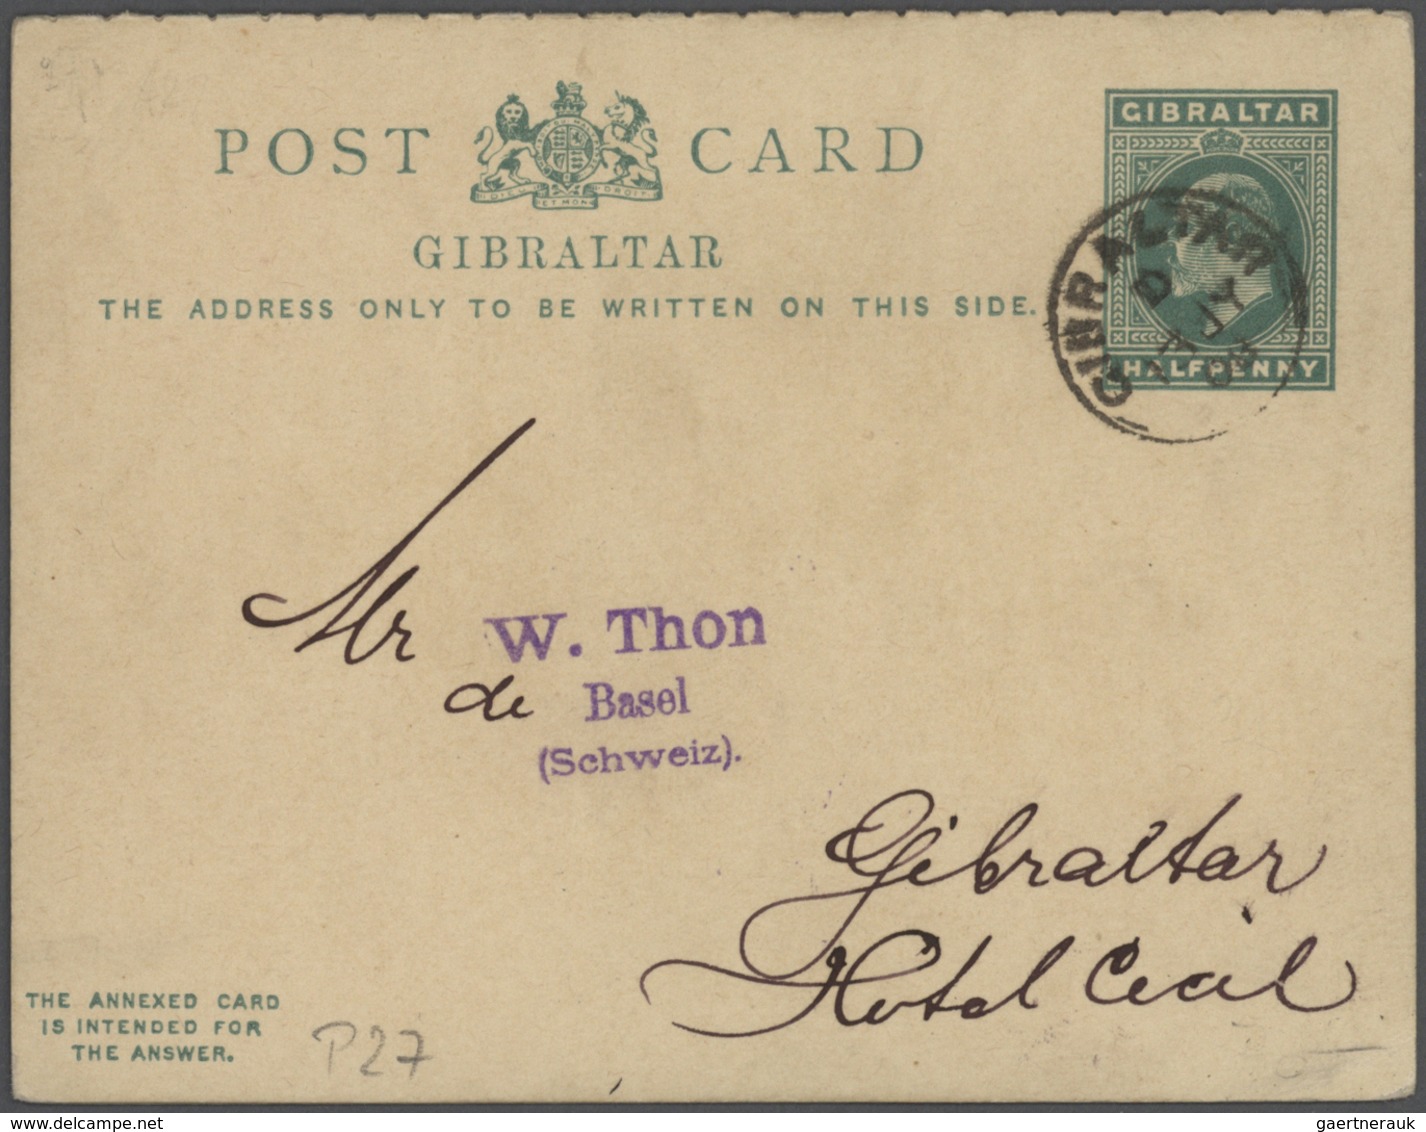 26566 Gibraltar - Ganzsachen: 1887/1940, interesting lot of ca. 64 postal stationery cards and covers, the